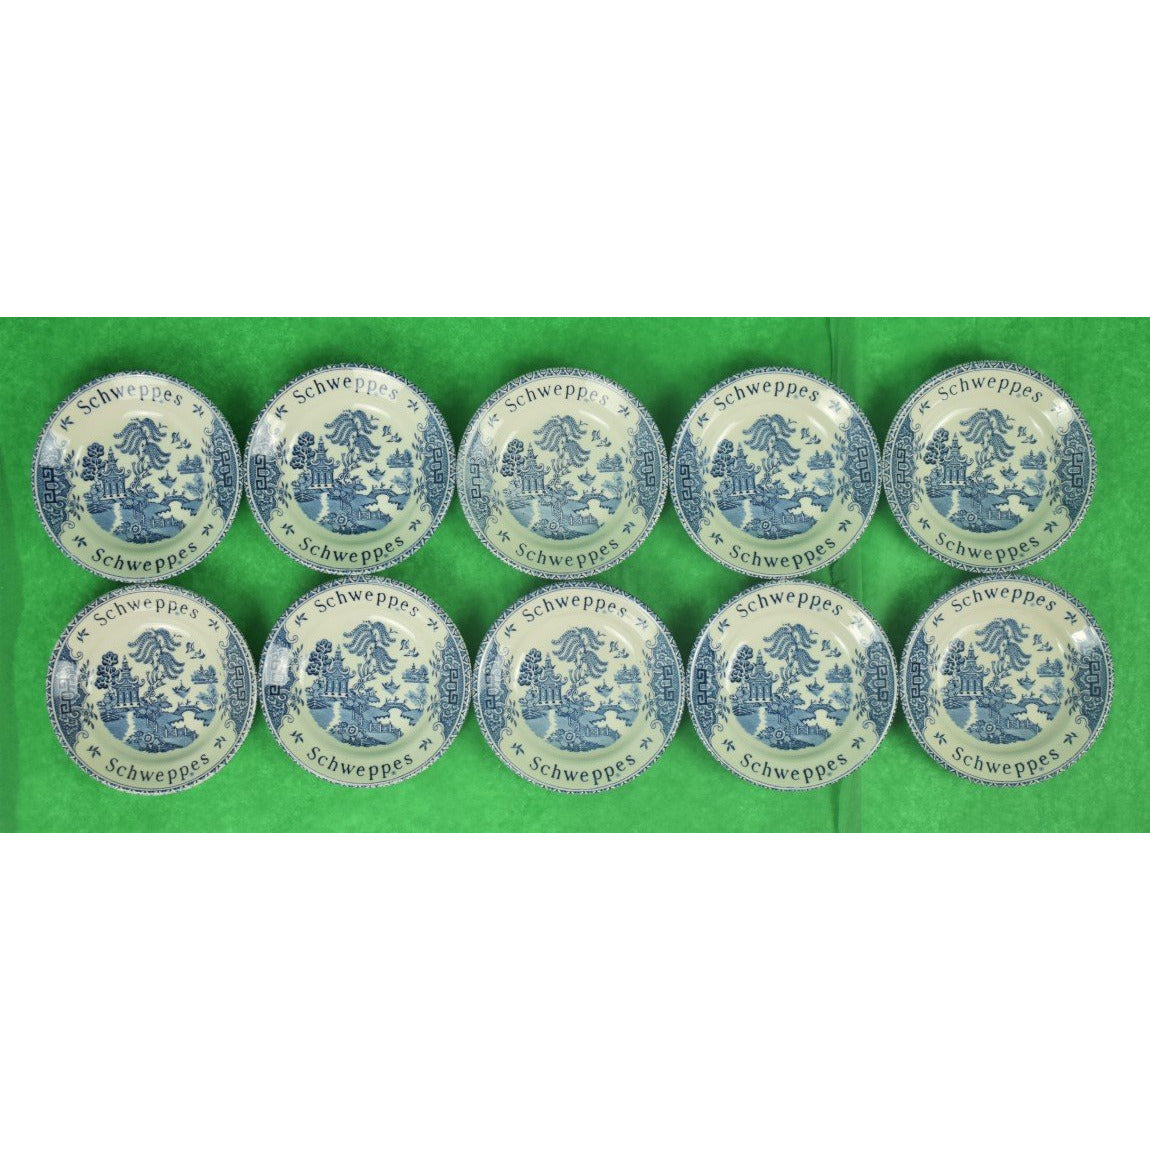 Set of 10 Schweppes Chinoiserie English Coasters